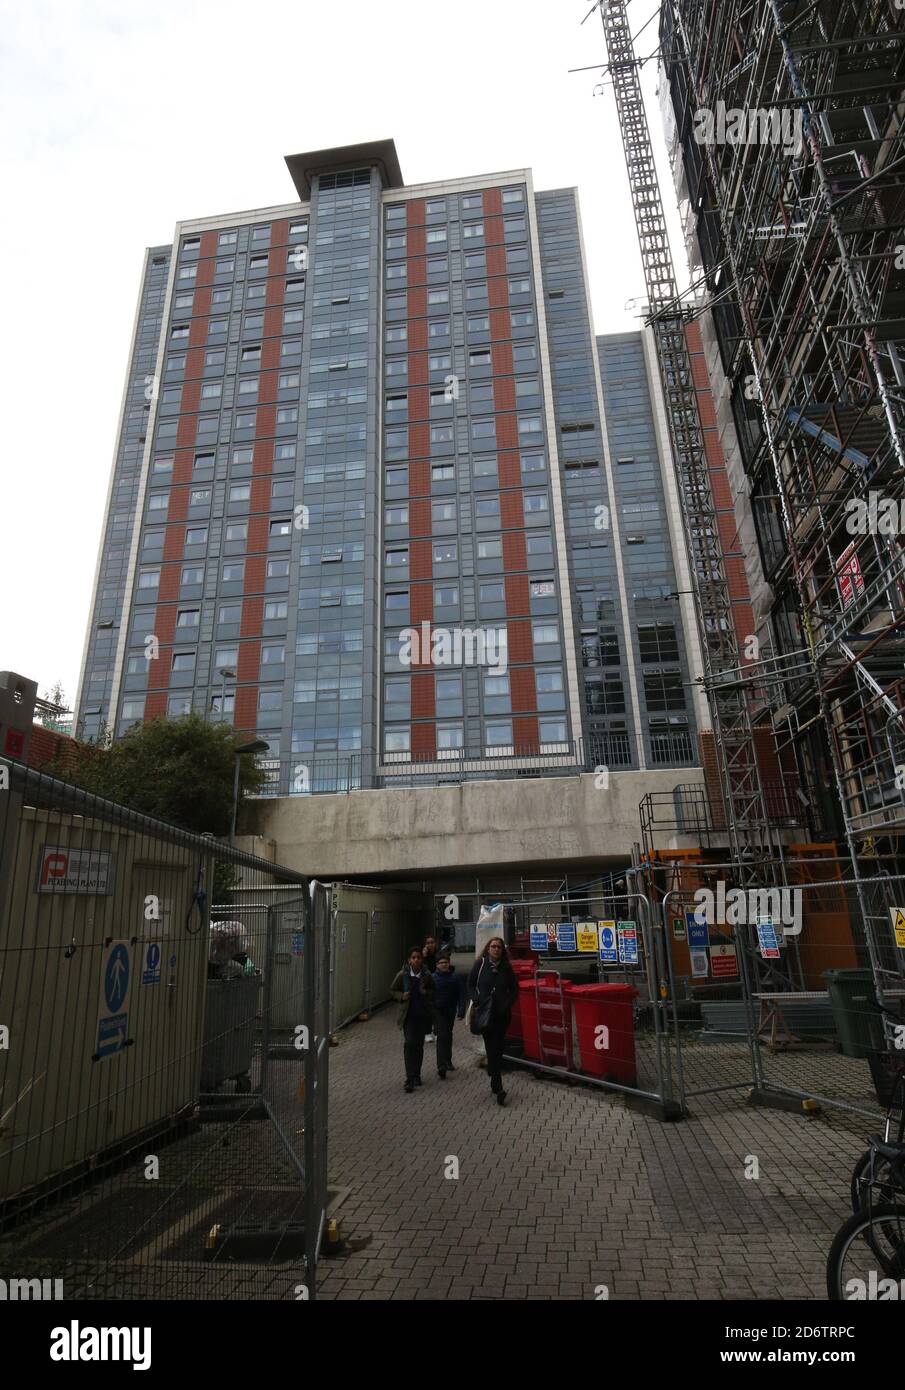 A view of Block F in the Paragon estate in Brentford, west London, where around 1,000 people are being asked to 'immediately' leave their homes due to fire safety concerns. Stock Photo